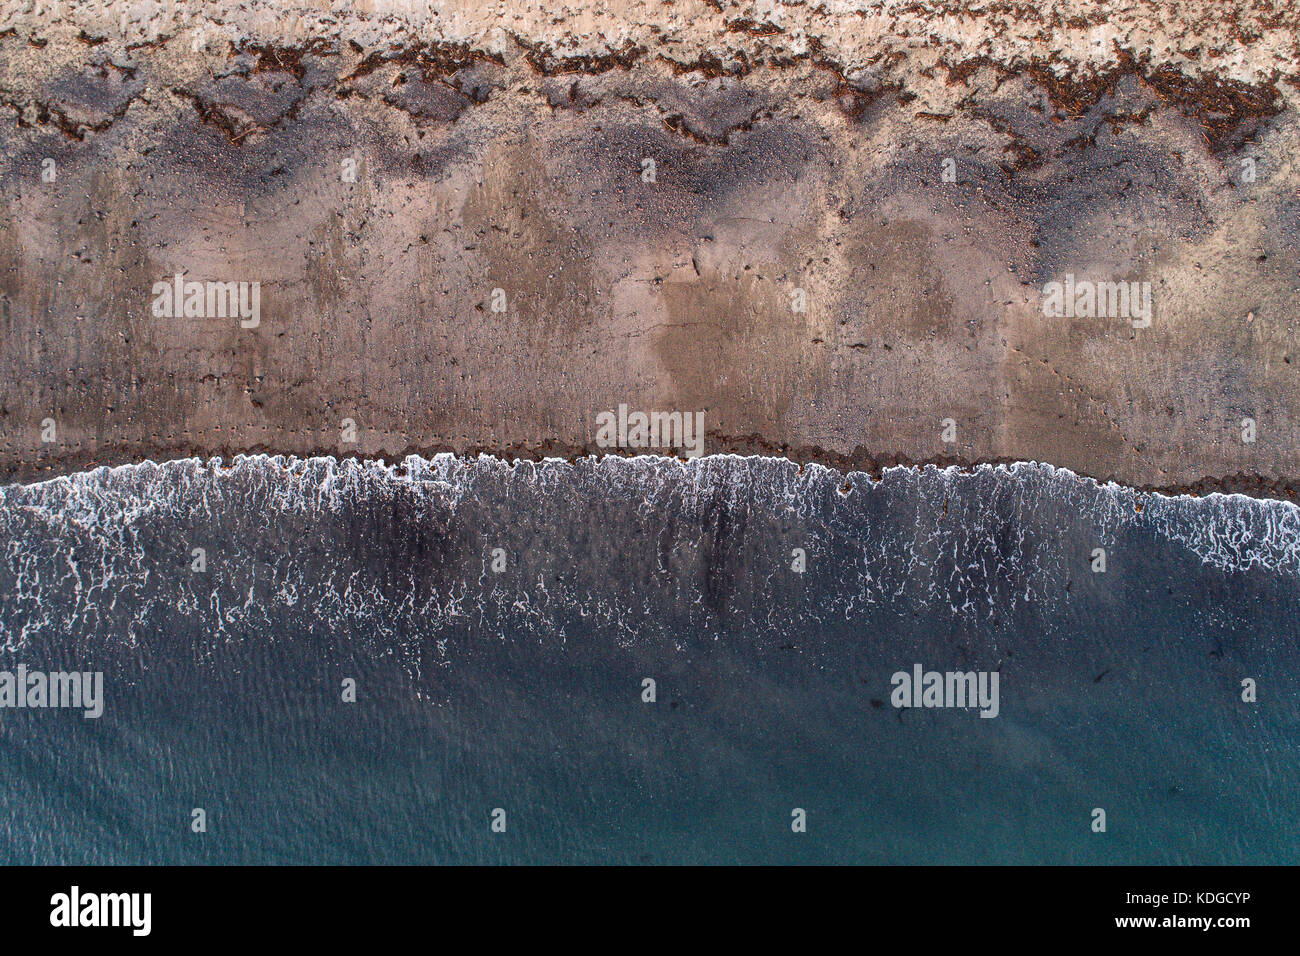 Aerial view of a sandy beach, waves breaking on the white sand Stock Photo